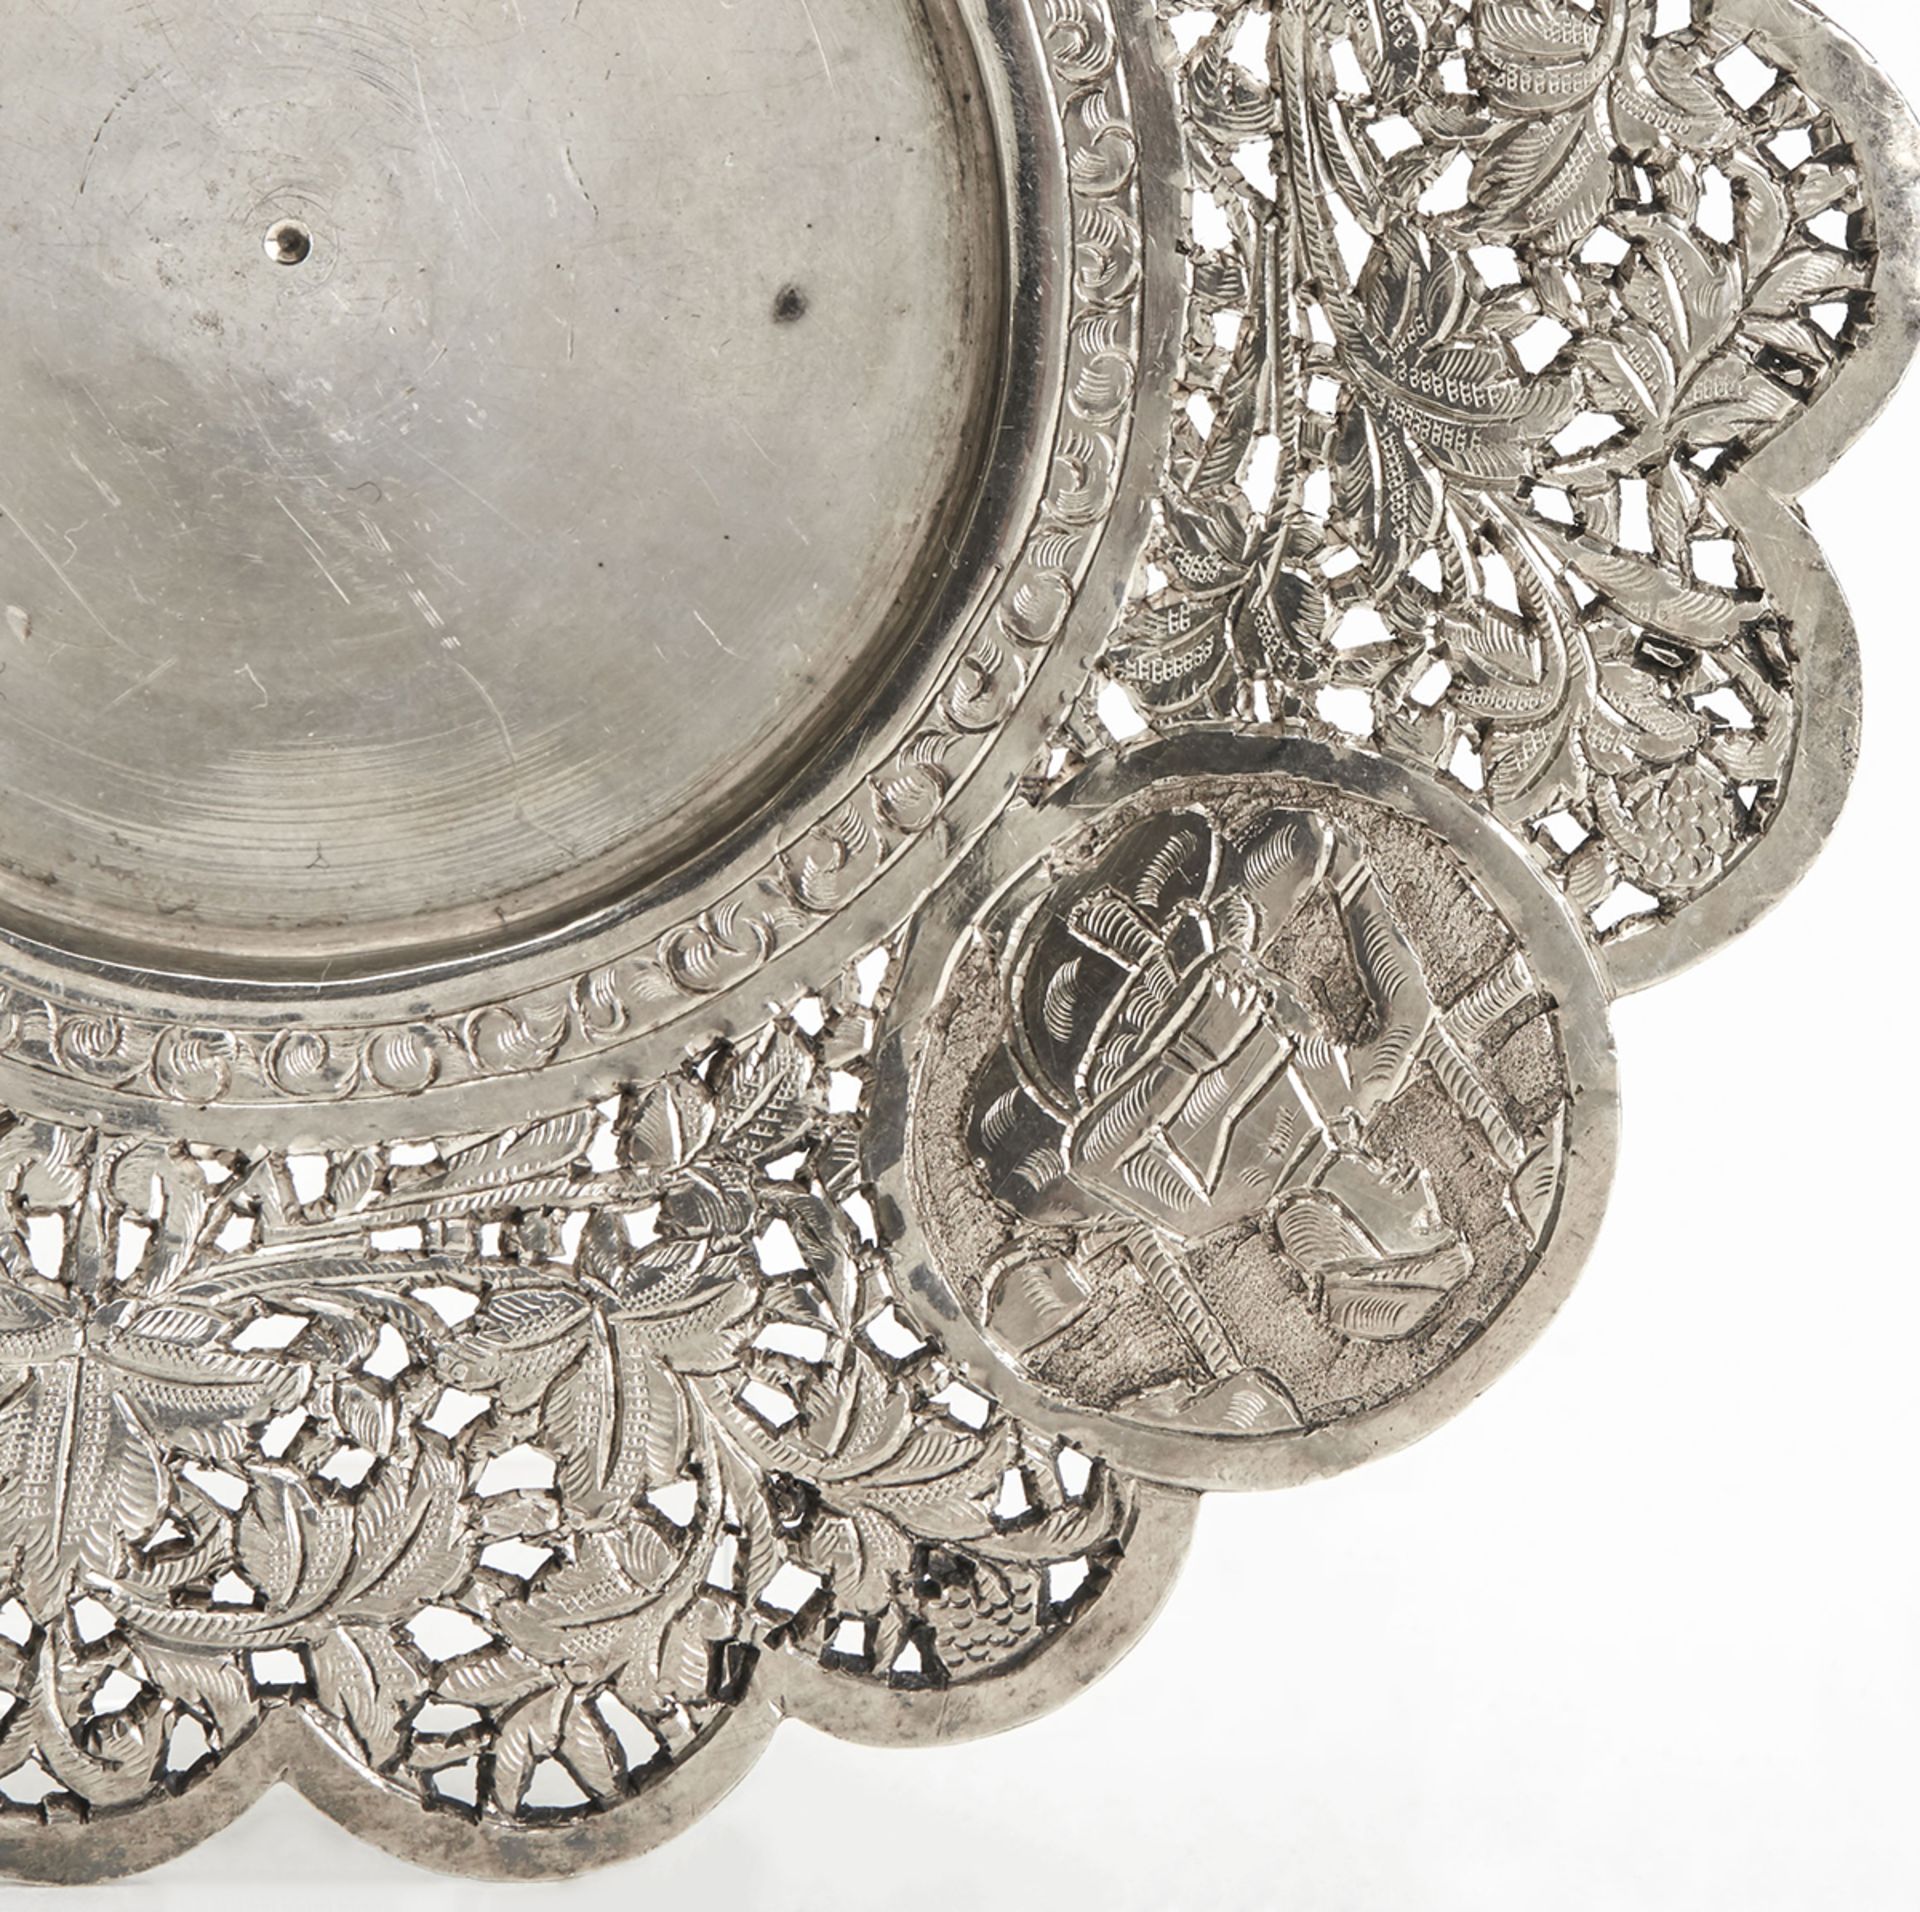 Antique Indian/Asian Silver Reticulated Dish Or Stand 19C. - Image 5 of 7